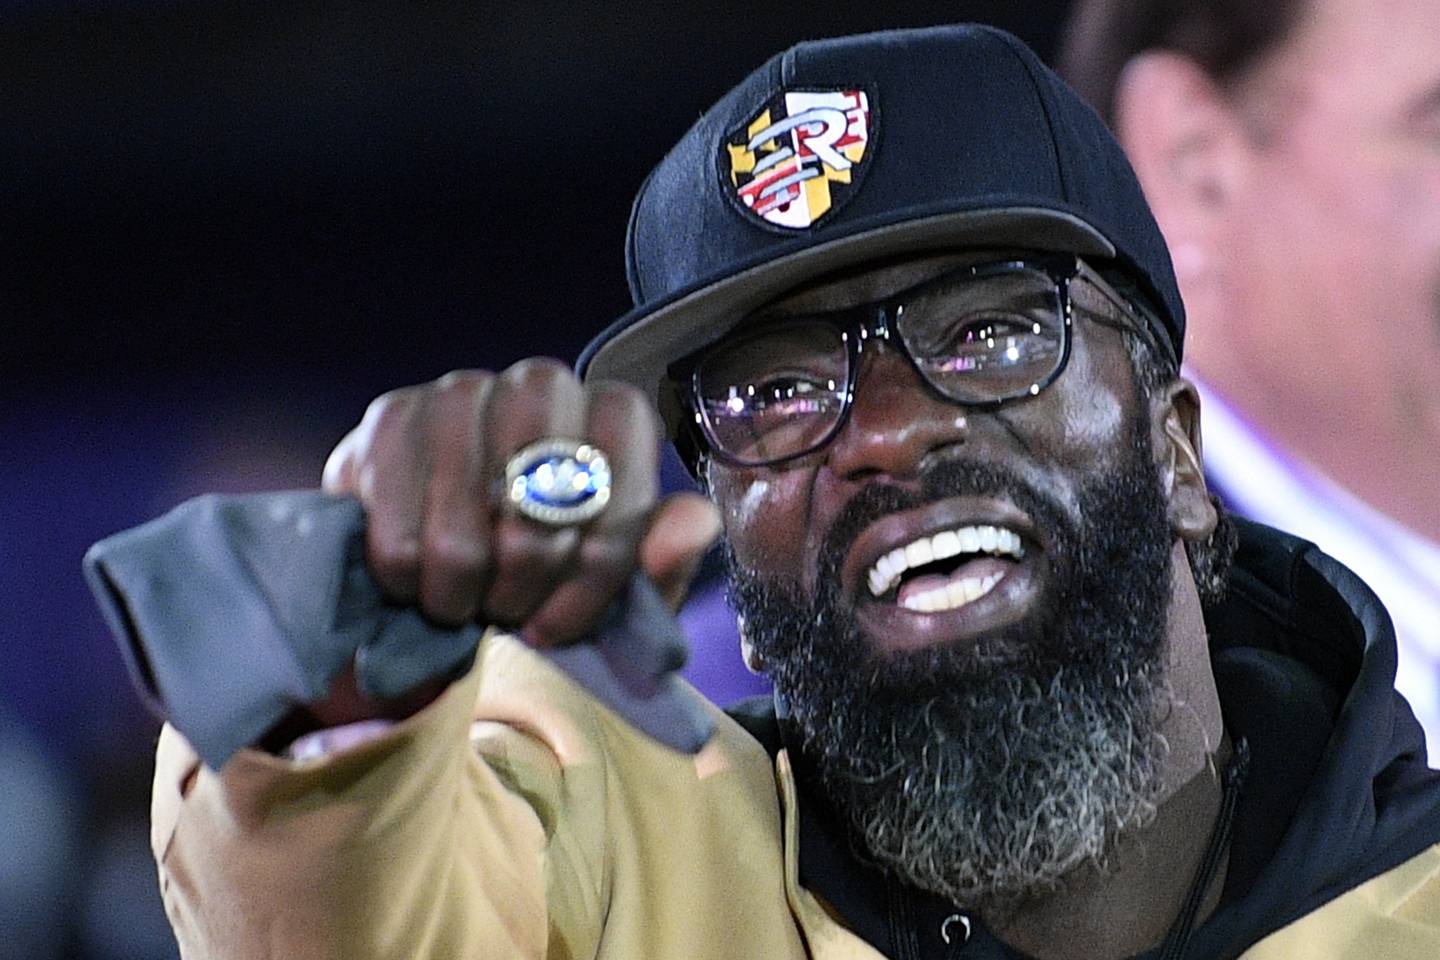 FILE - In this Nov. 3, 2019, file photo, former Baltimore Ravens safety Ed Reed displays his Pro Football Hall of Fame ring during a halftime ceremony at an NFL football game between the Ravens and the New England Patriots in Baltimore. Pro Football Hall of Famer Ed Reed has agreed to become the football coach at Bethune-Cookman and is leaving his job with the Miami Hurricanes, the schools announced Tuesday night, Dec. 27, 2022.